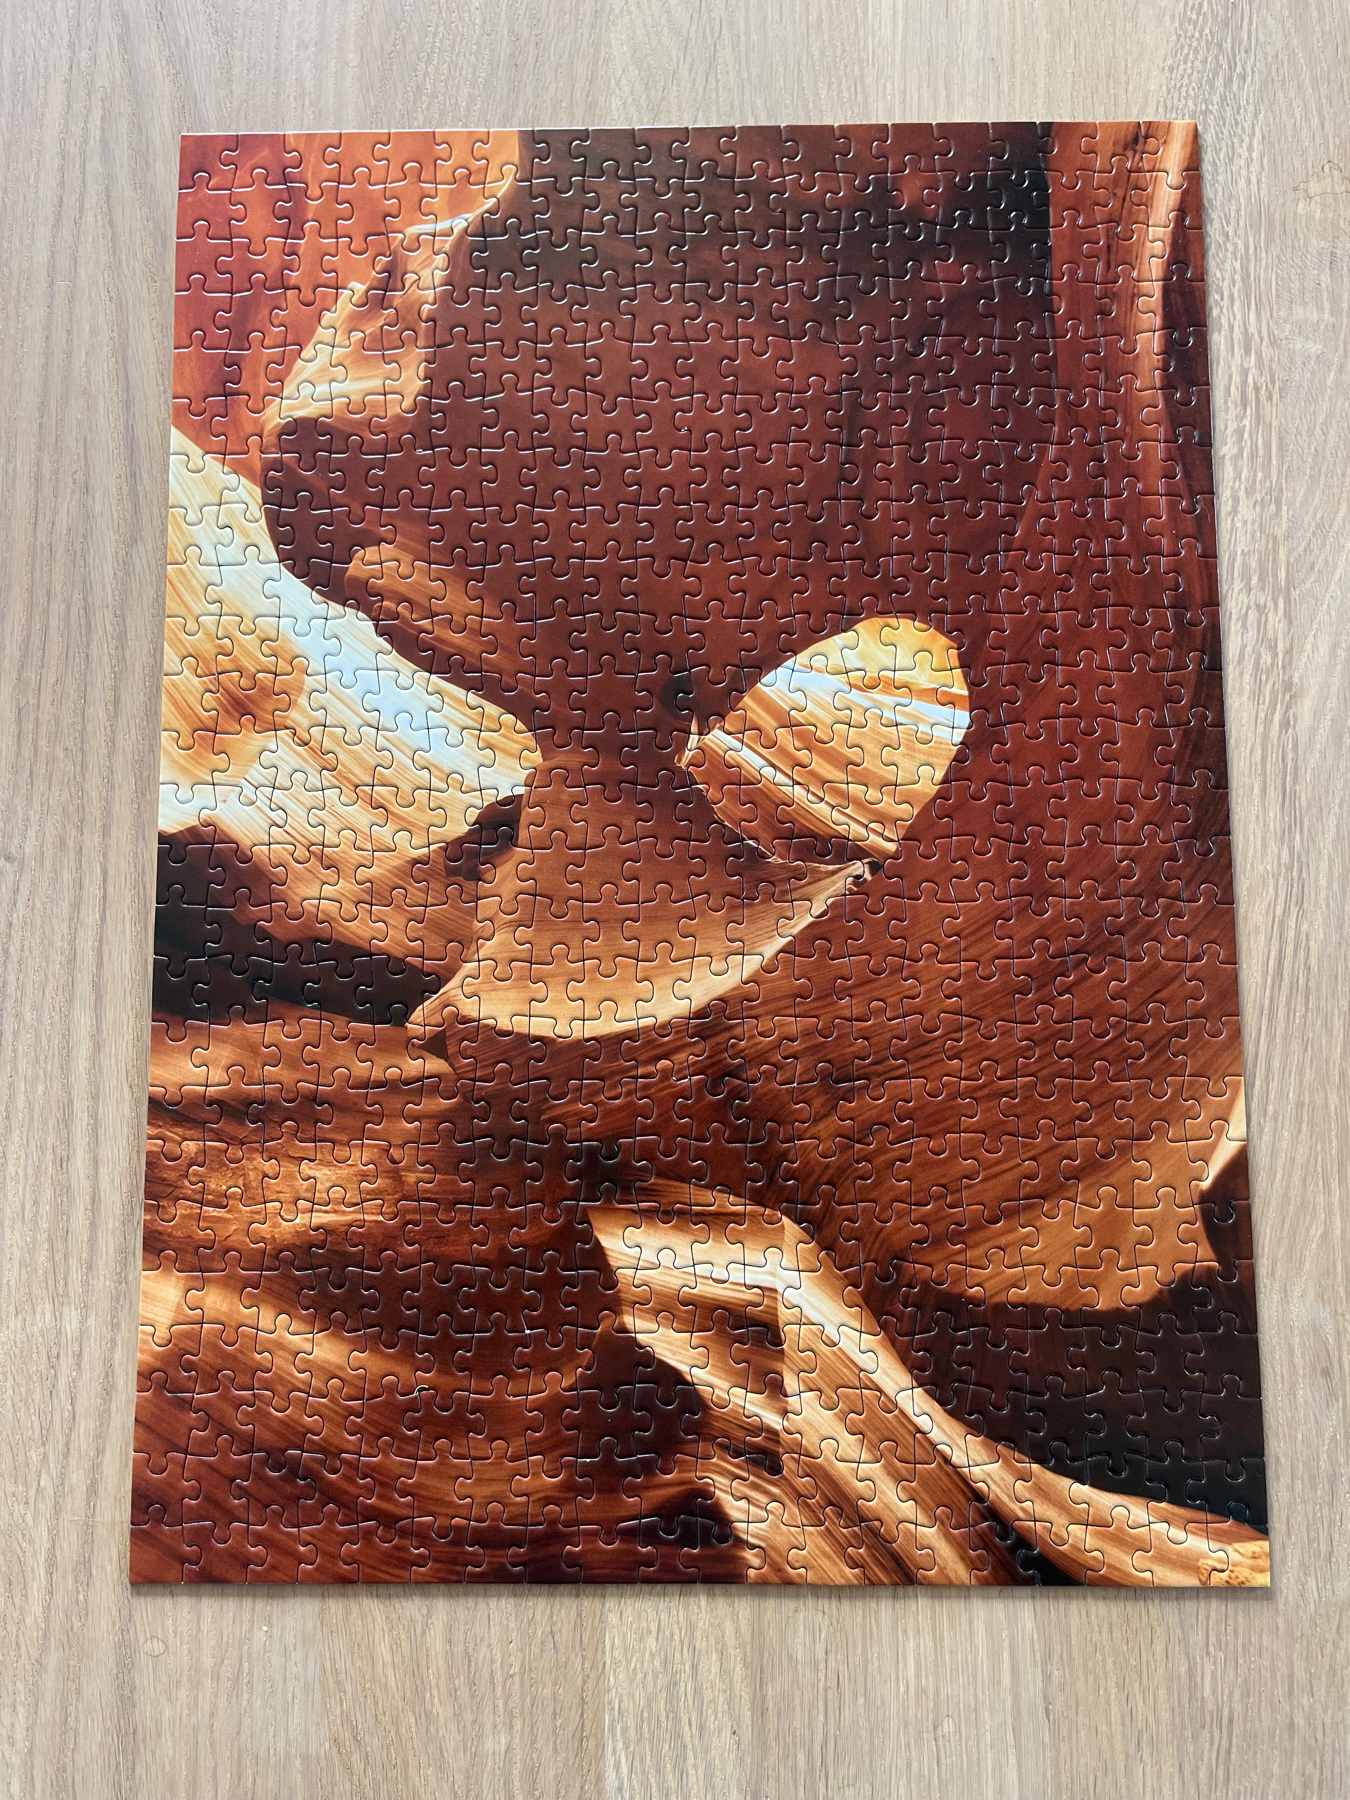 A 500 piece completed jigsaw puzzle on a wooden table. The puzzle is of rocks in different shades of browns, blacks and whites. 